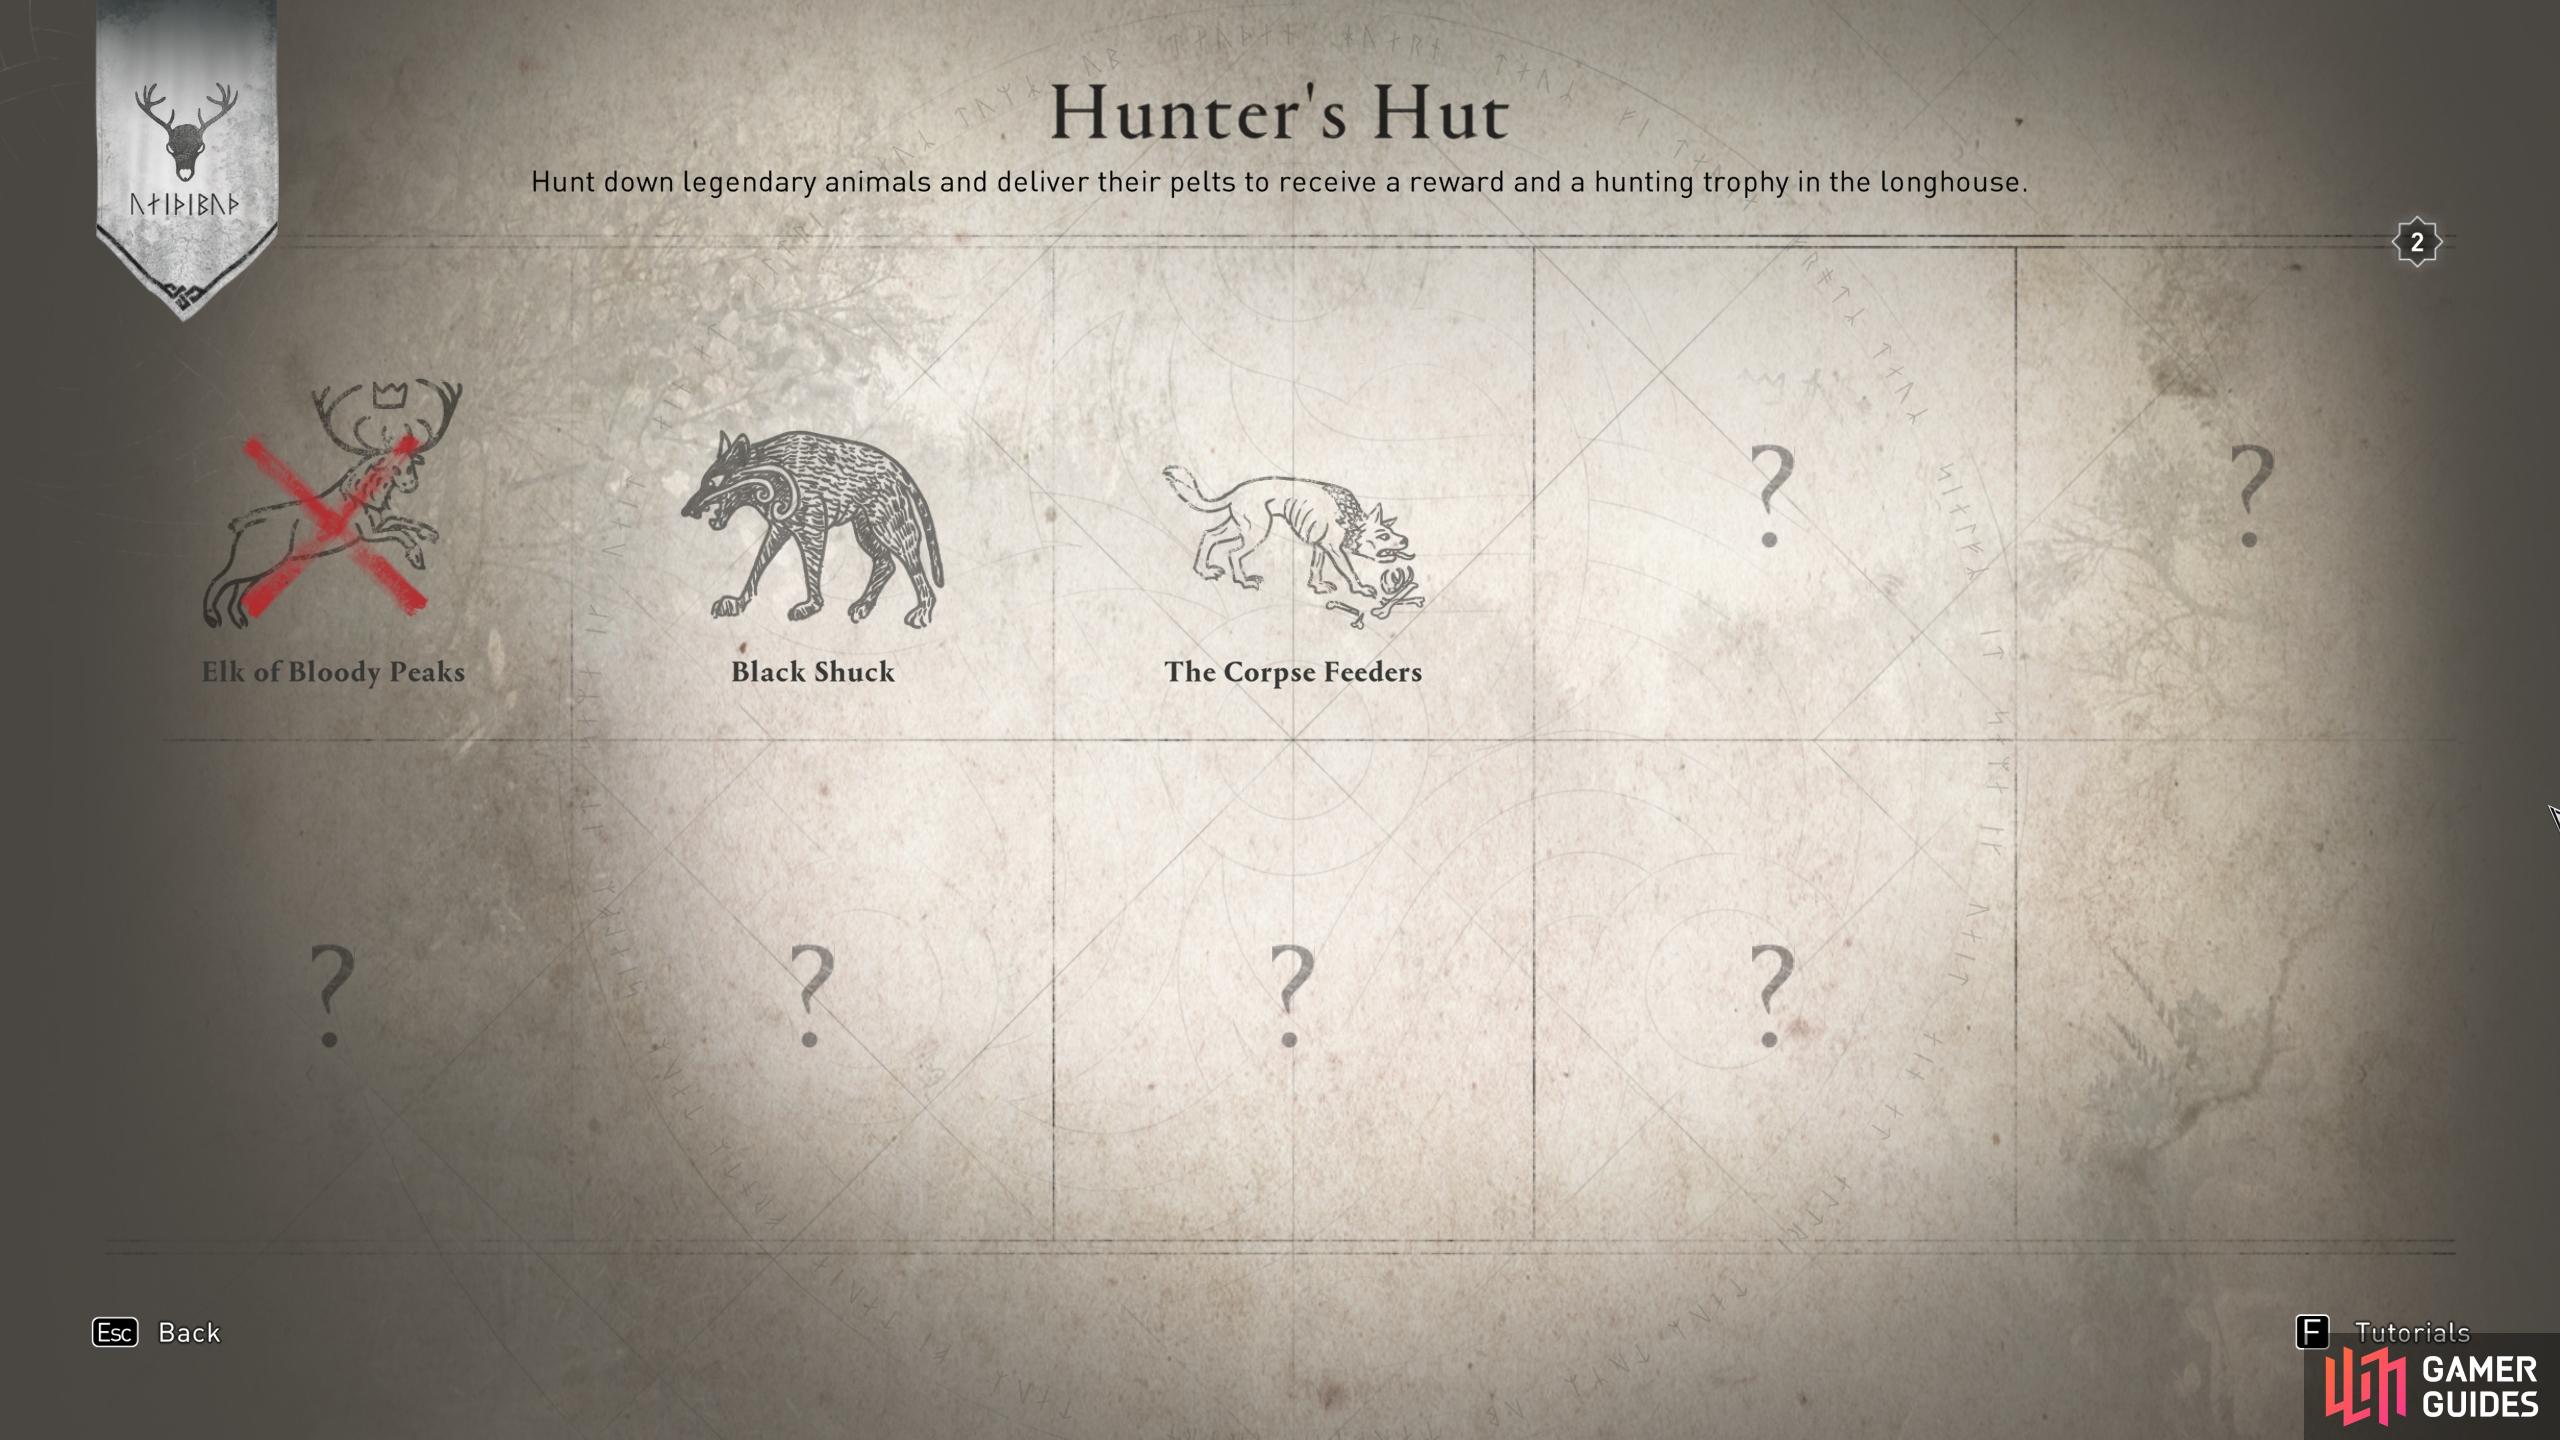 Visit Wallace in the Hunter's Hut once you've killed a legendary animal in exchange for a trophy for the longhouse.